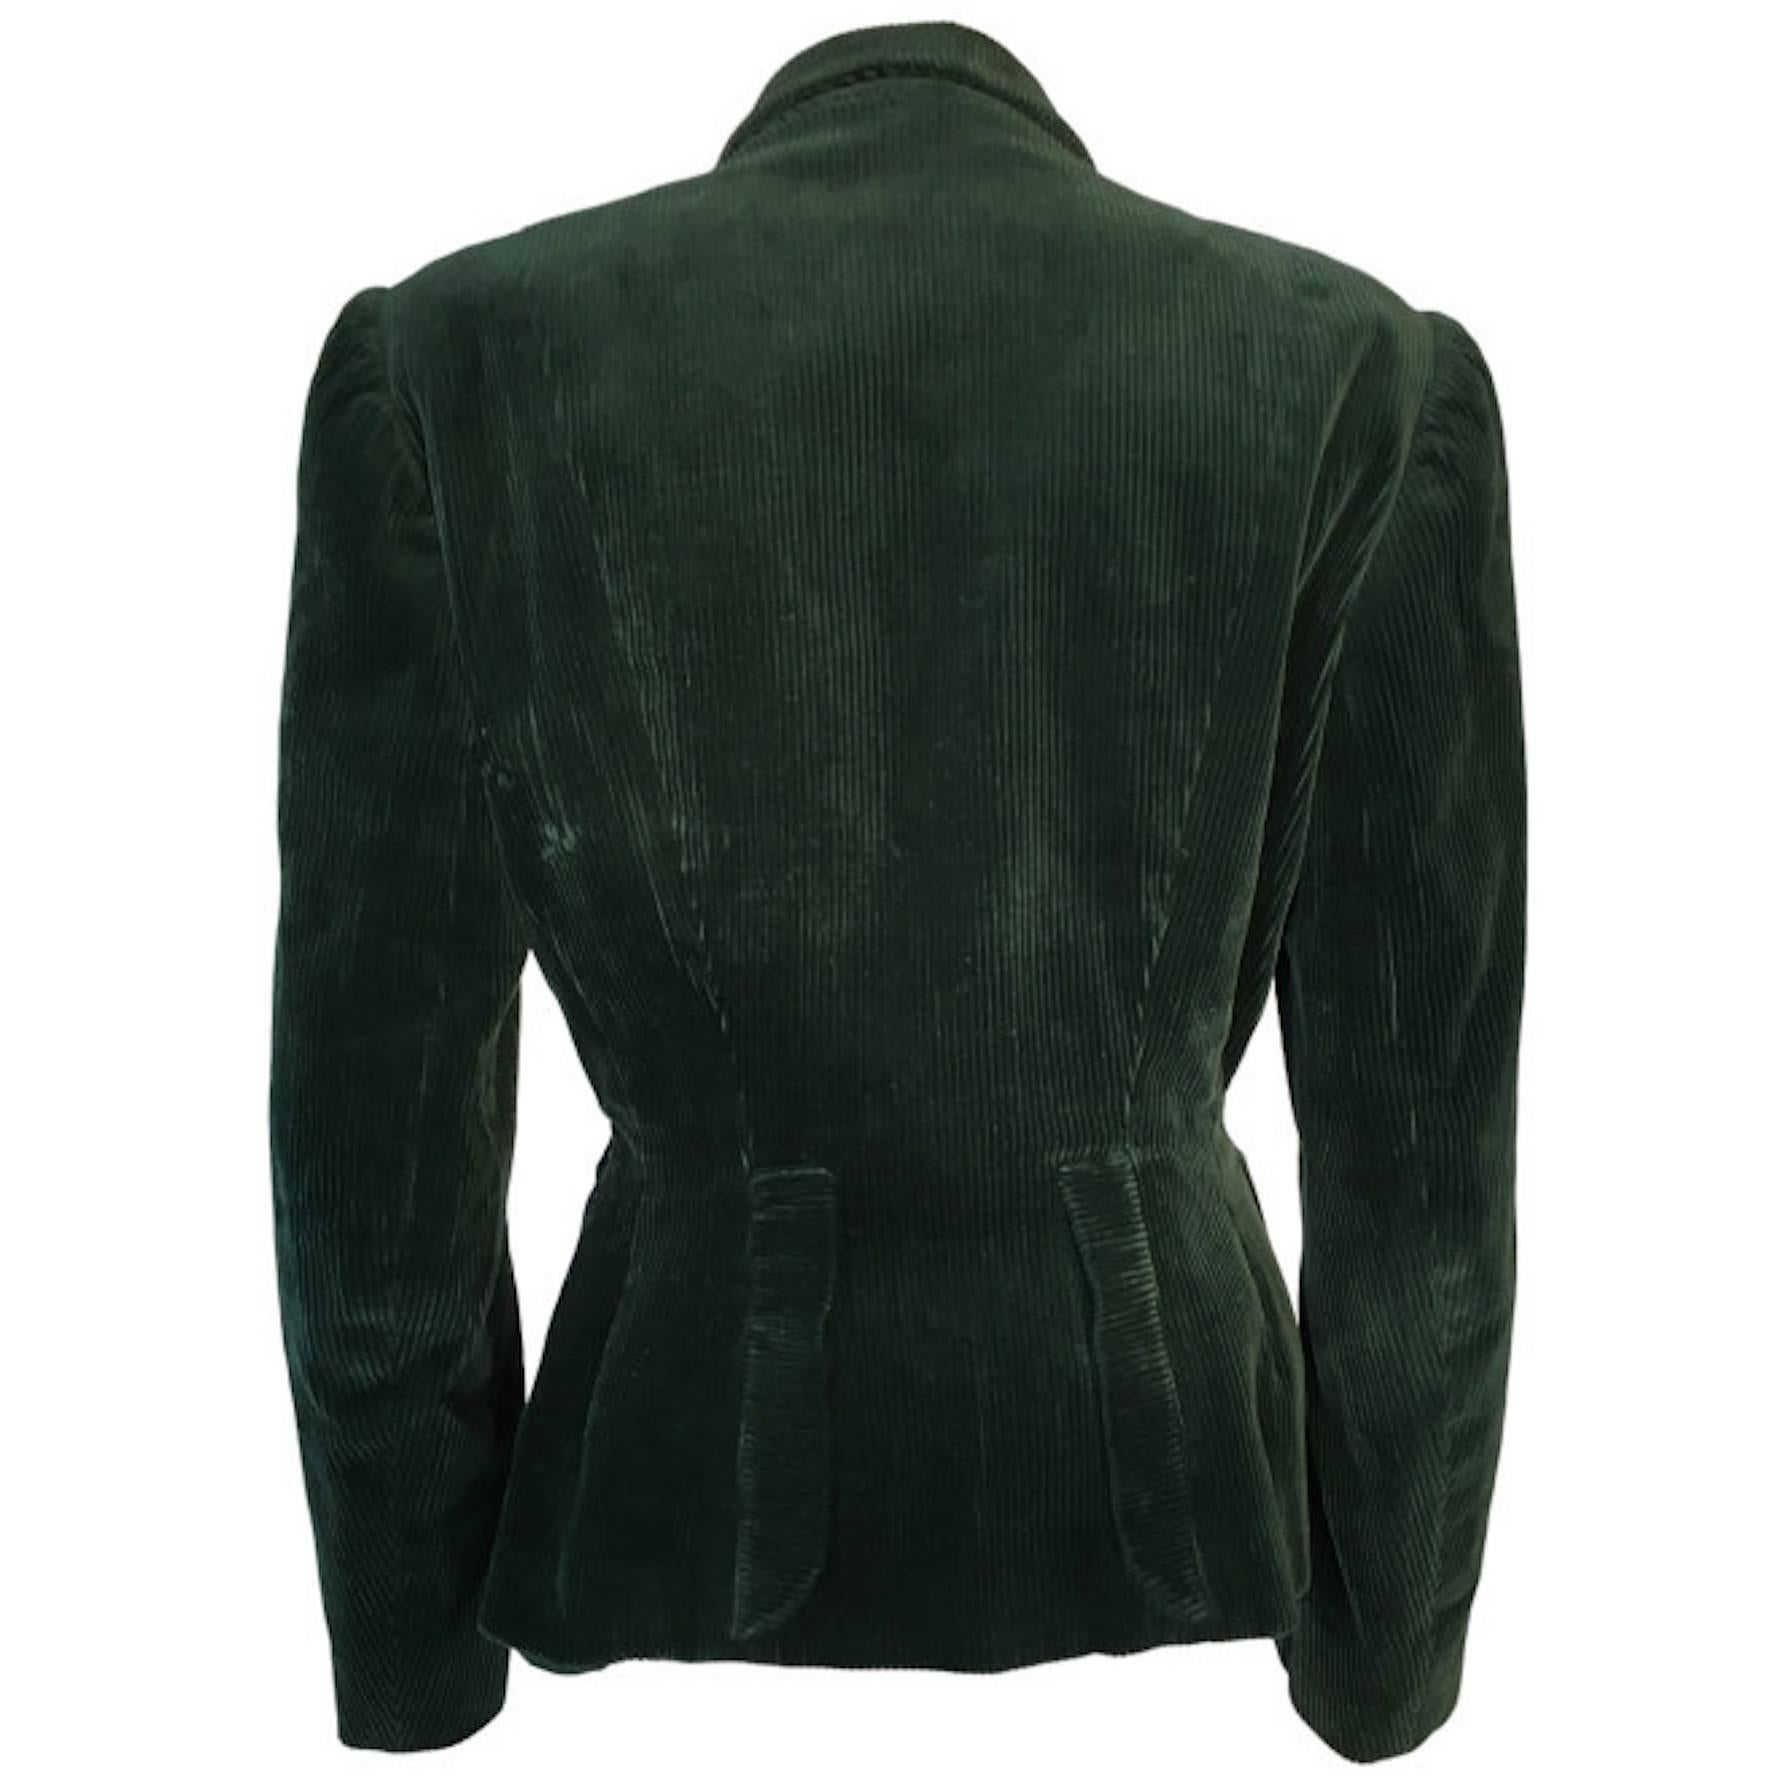 A hard to find jacket by Jacqmar. 1940s era cotton emerald green corduroy jacket, lined with branded crepe, nipped in waist and button front fastening. Hand sewn in label. Structured shoulders and 4 pockets at the front.

Size UK 10 measuring 18.5